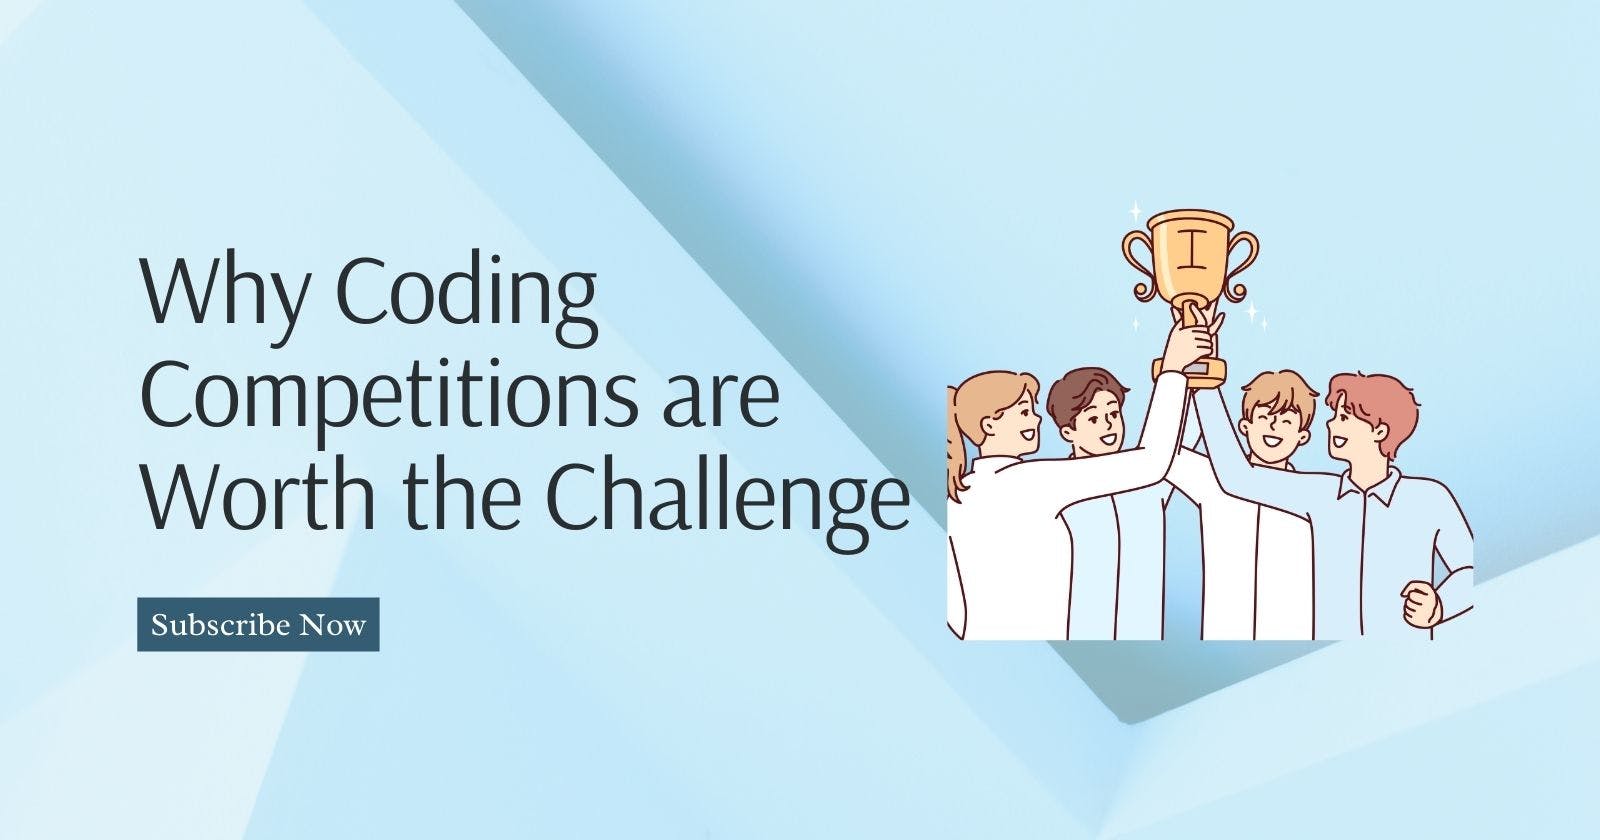 Why Coding Competitions are Worth the Challenge